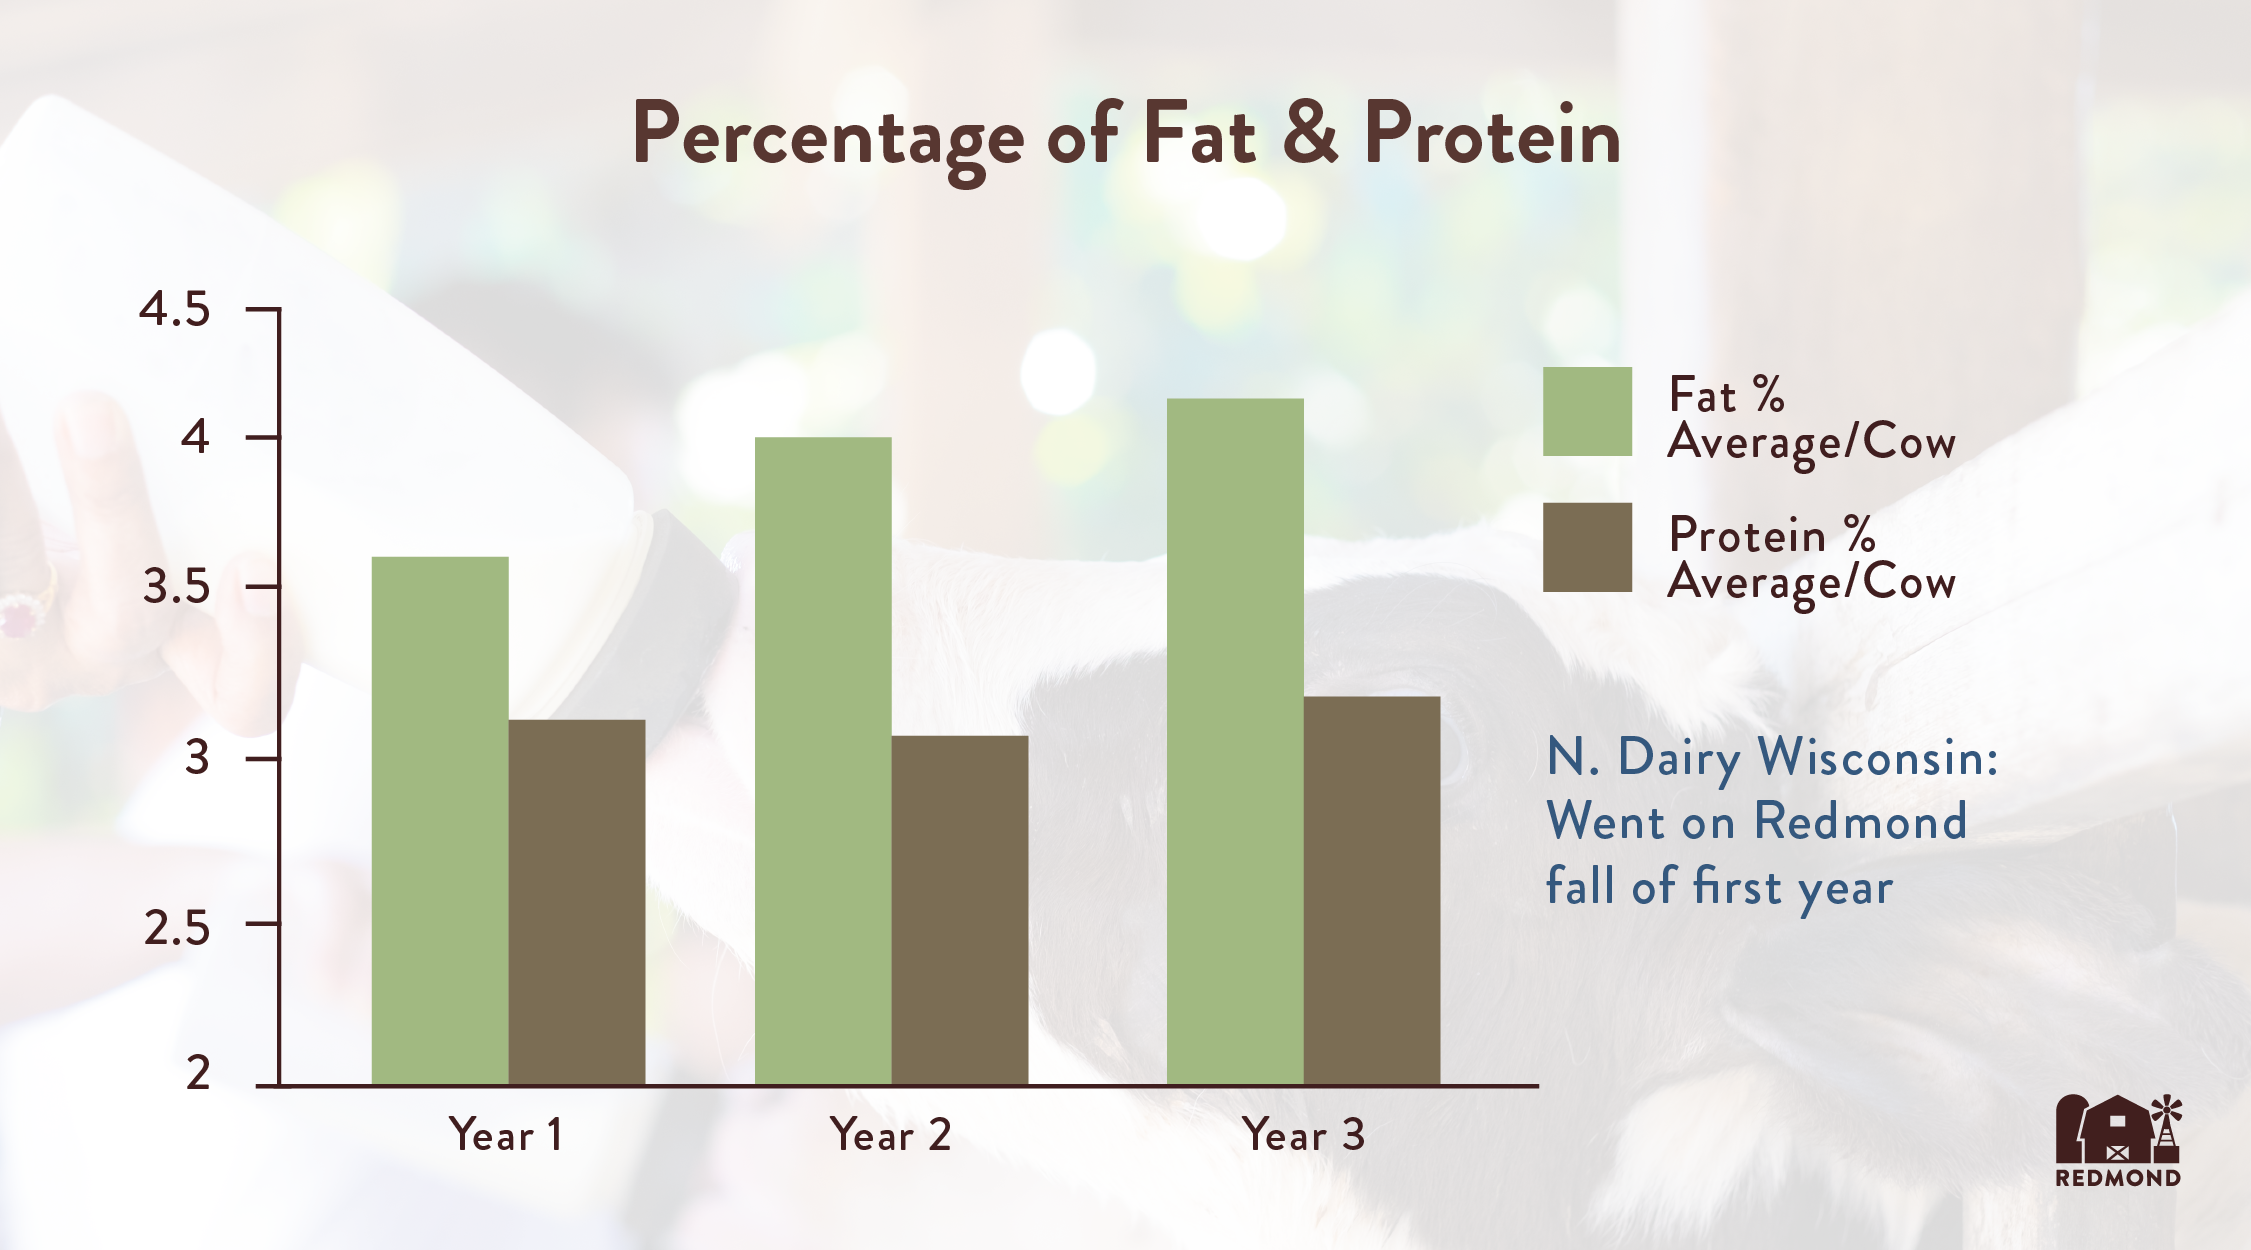 Redmond improves milk fat and protein levels